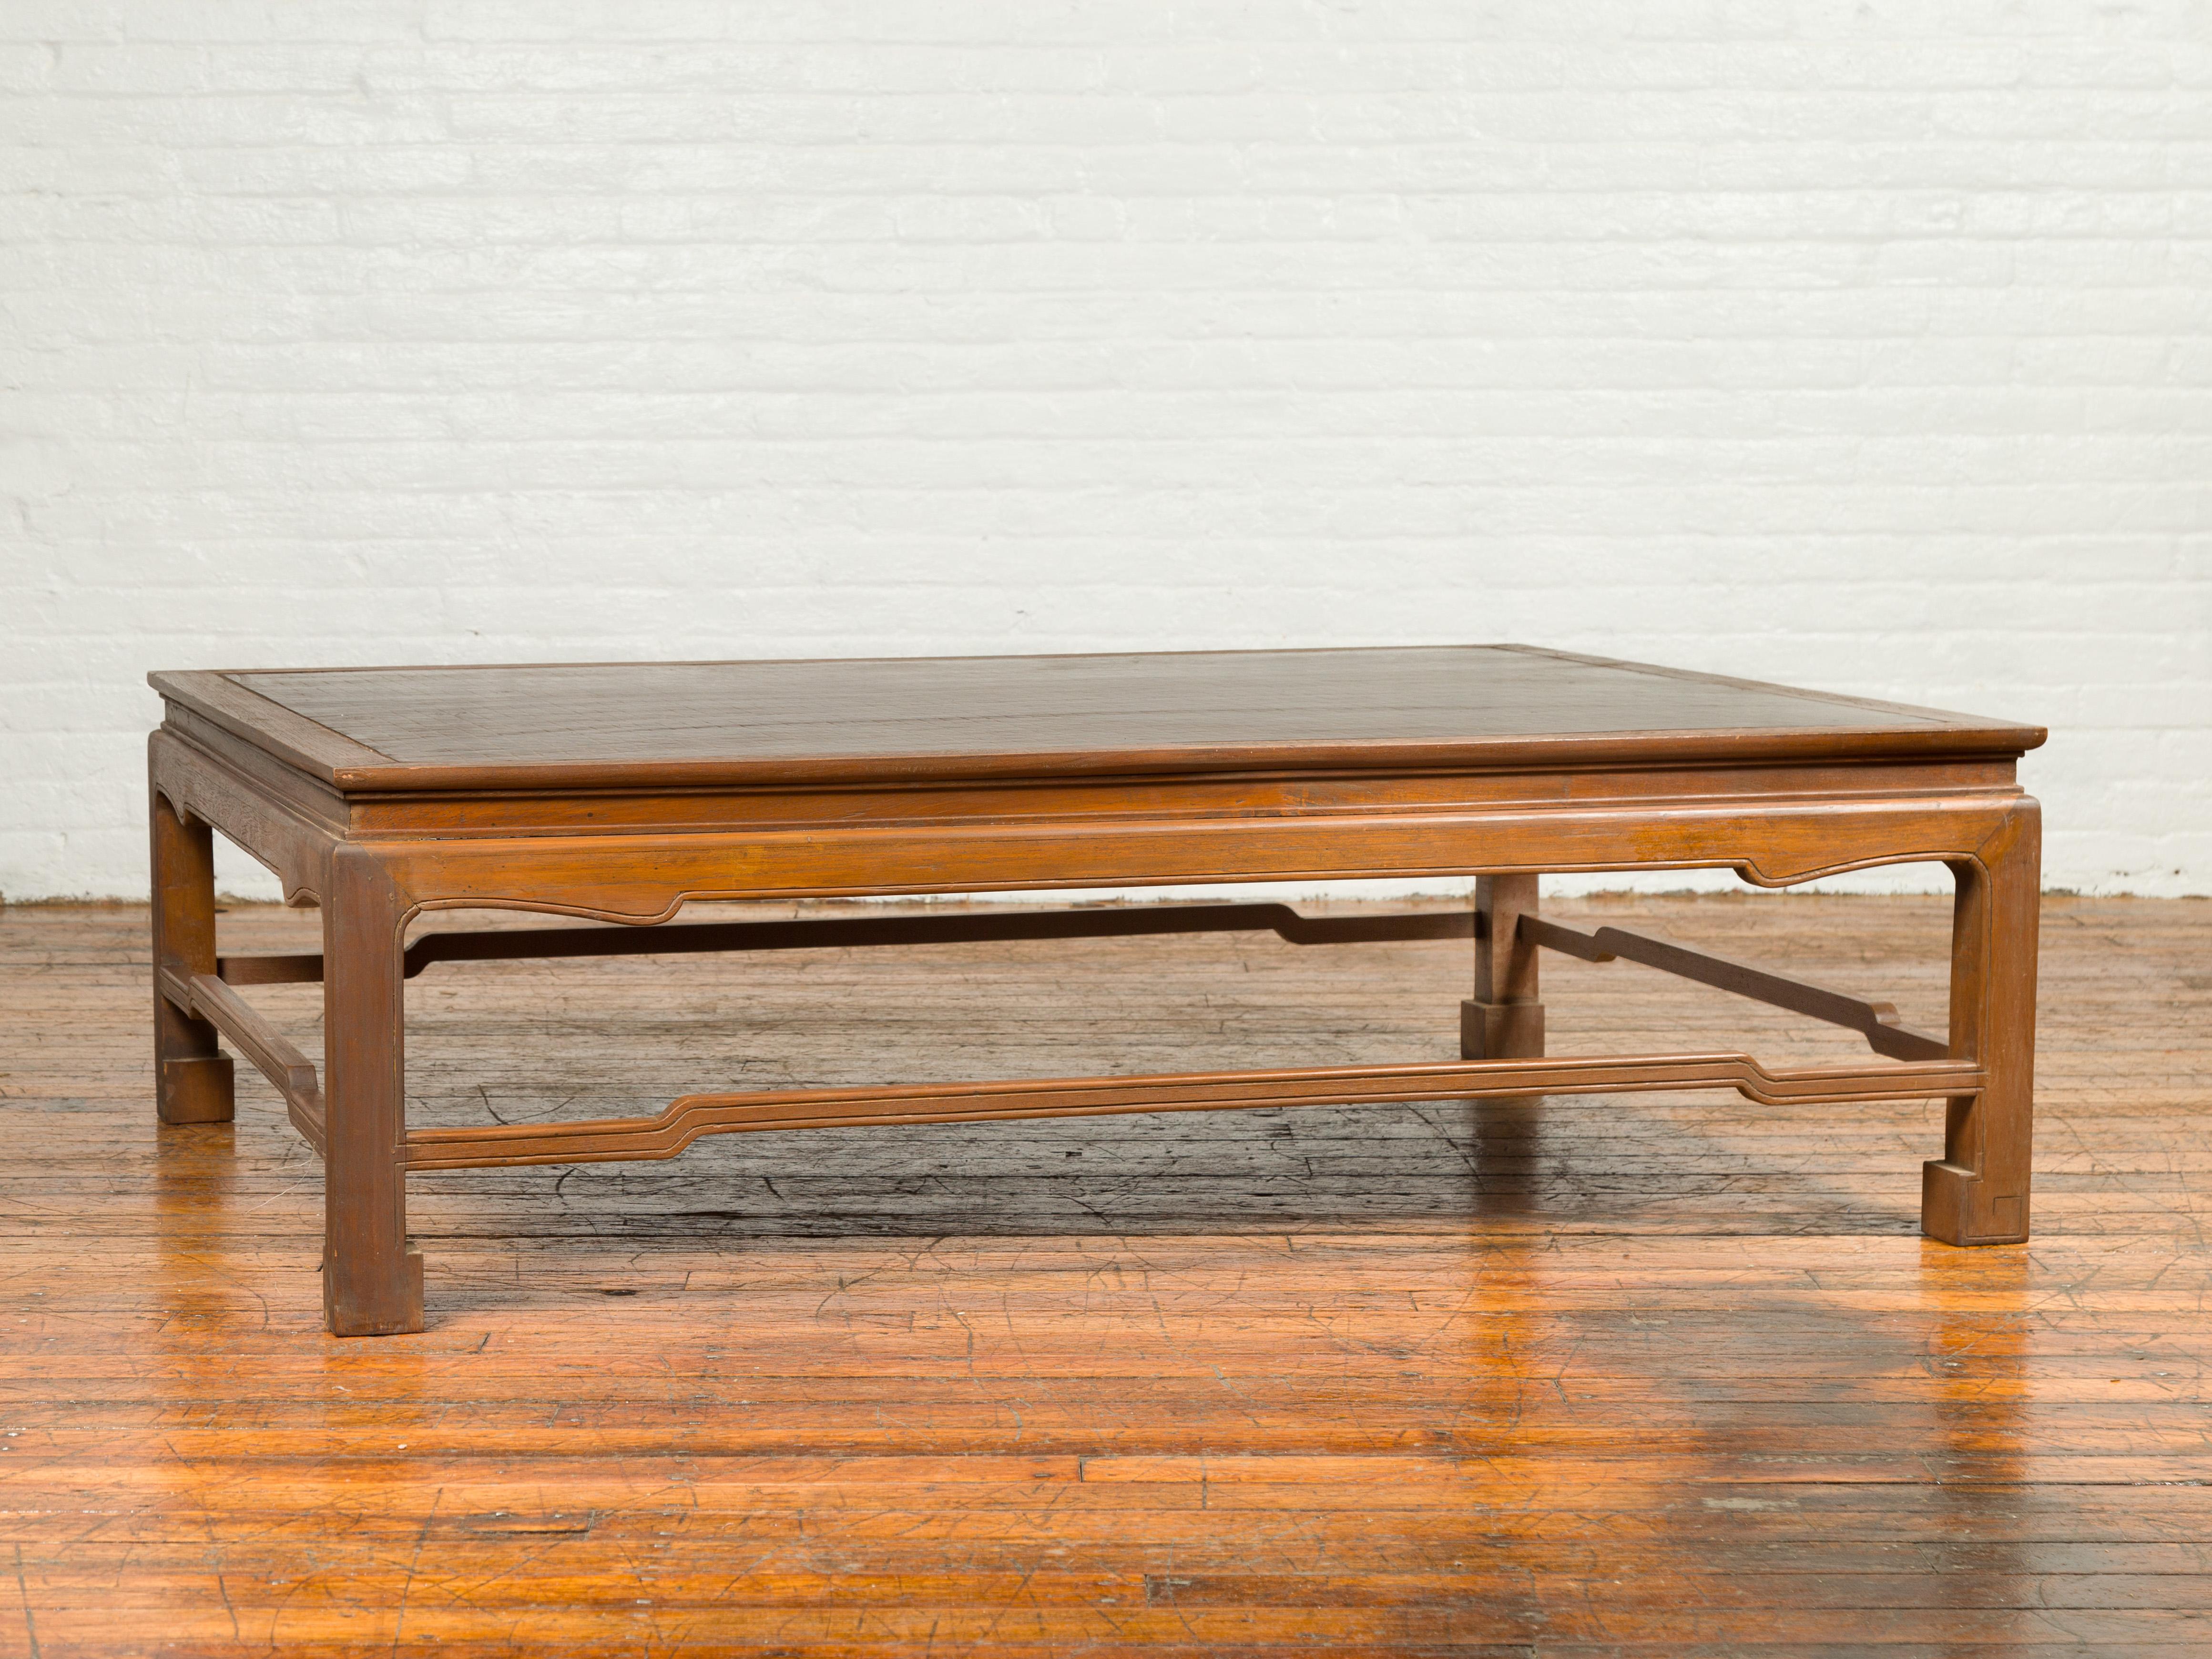 Vintage Burmese Long Coffee Table with Negora Lacquer and Humpback Stretchers 5